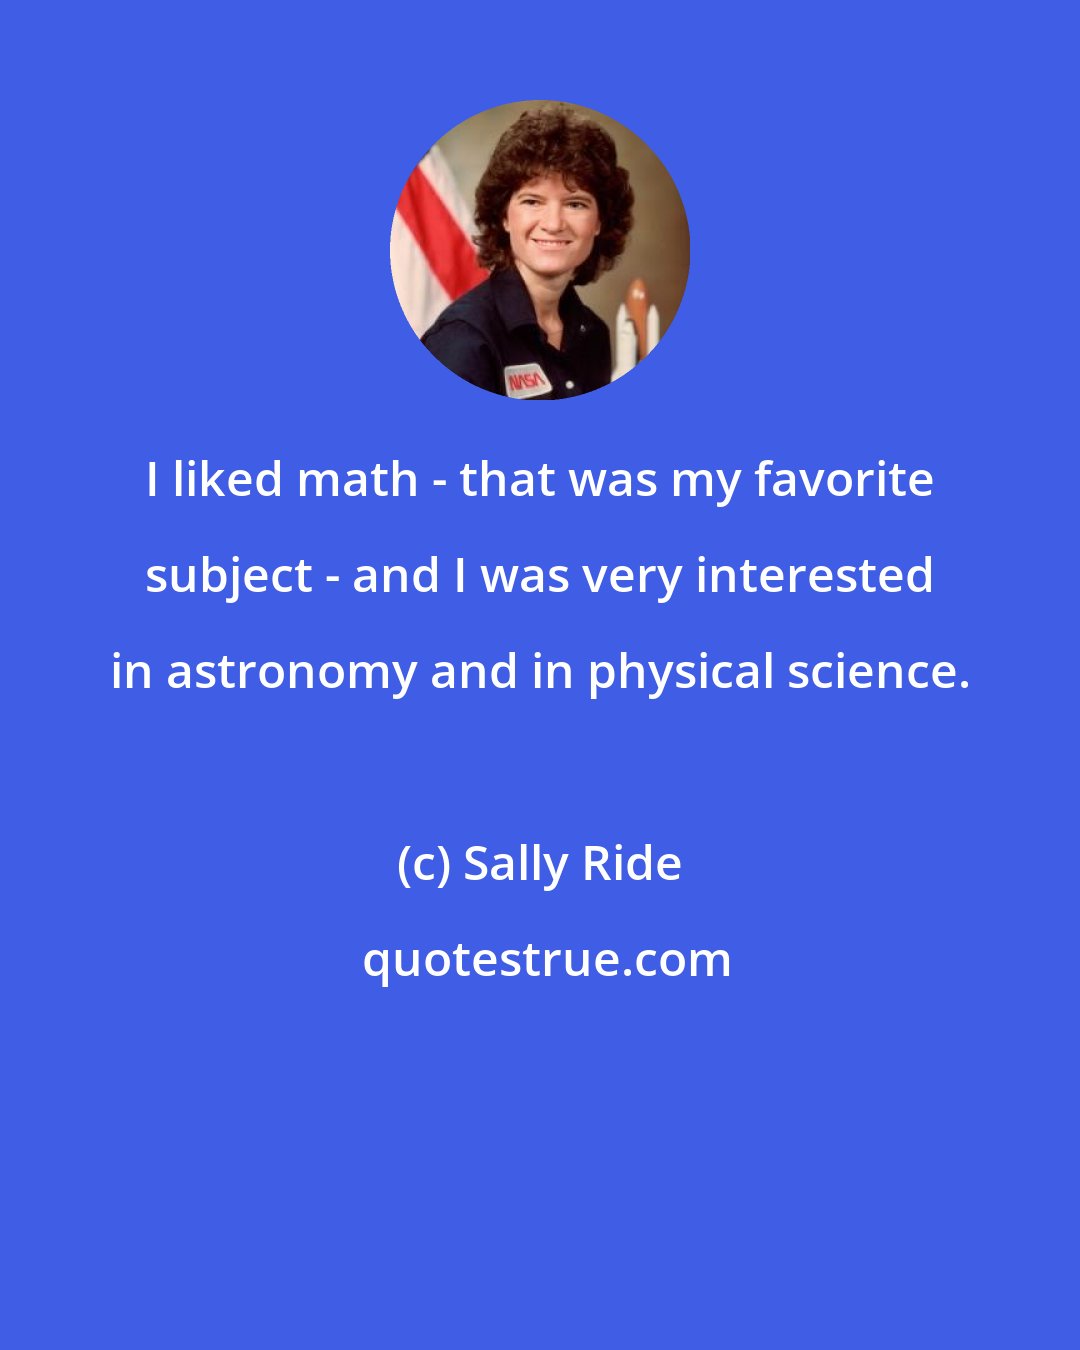 Sally Ride: I liked math - that was my favorite subject - and I was very interested in astronomy and in physical science.